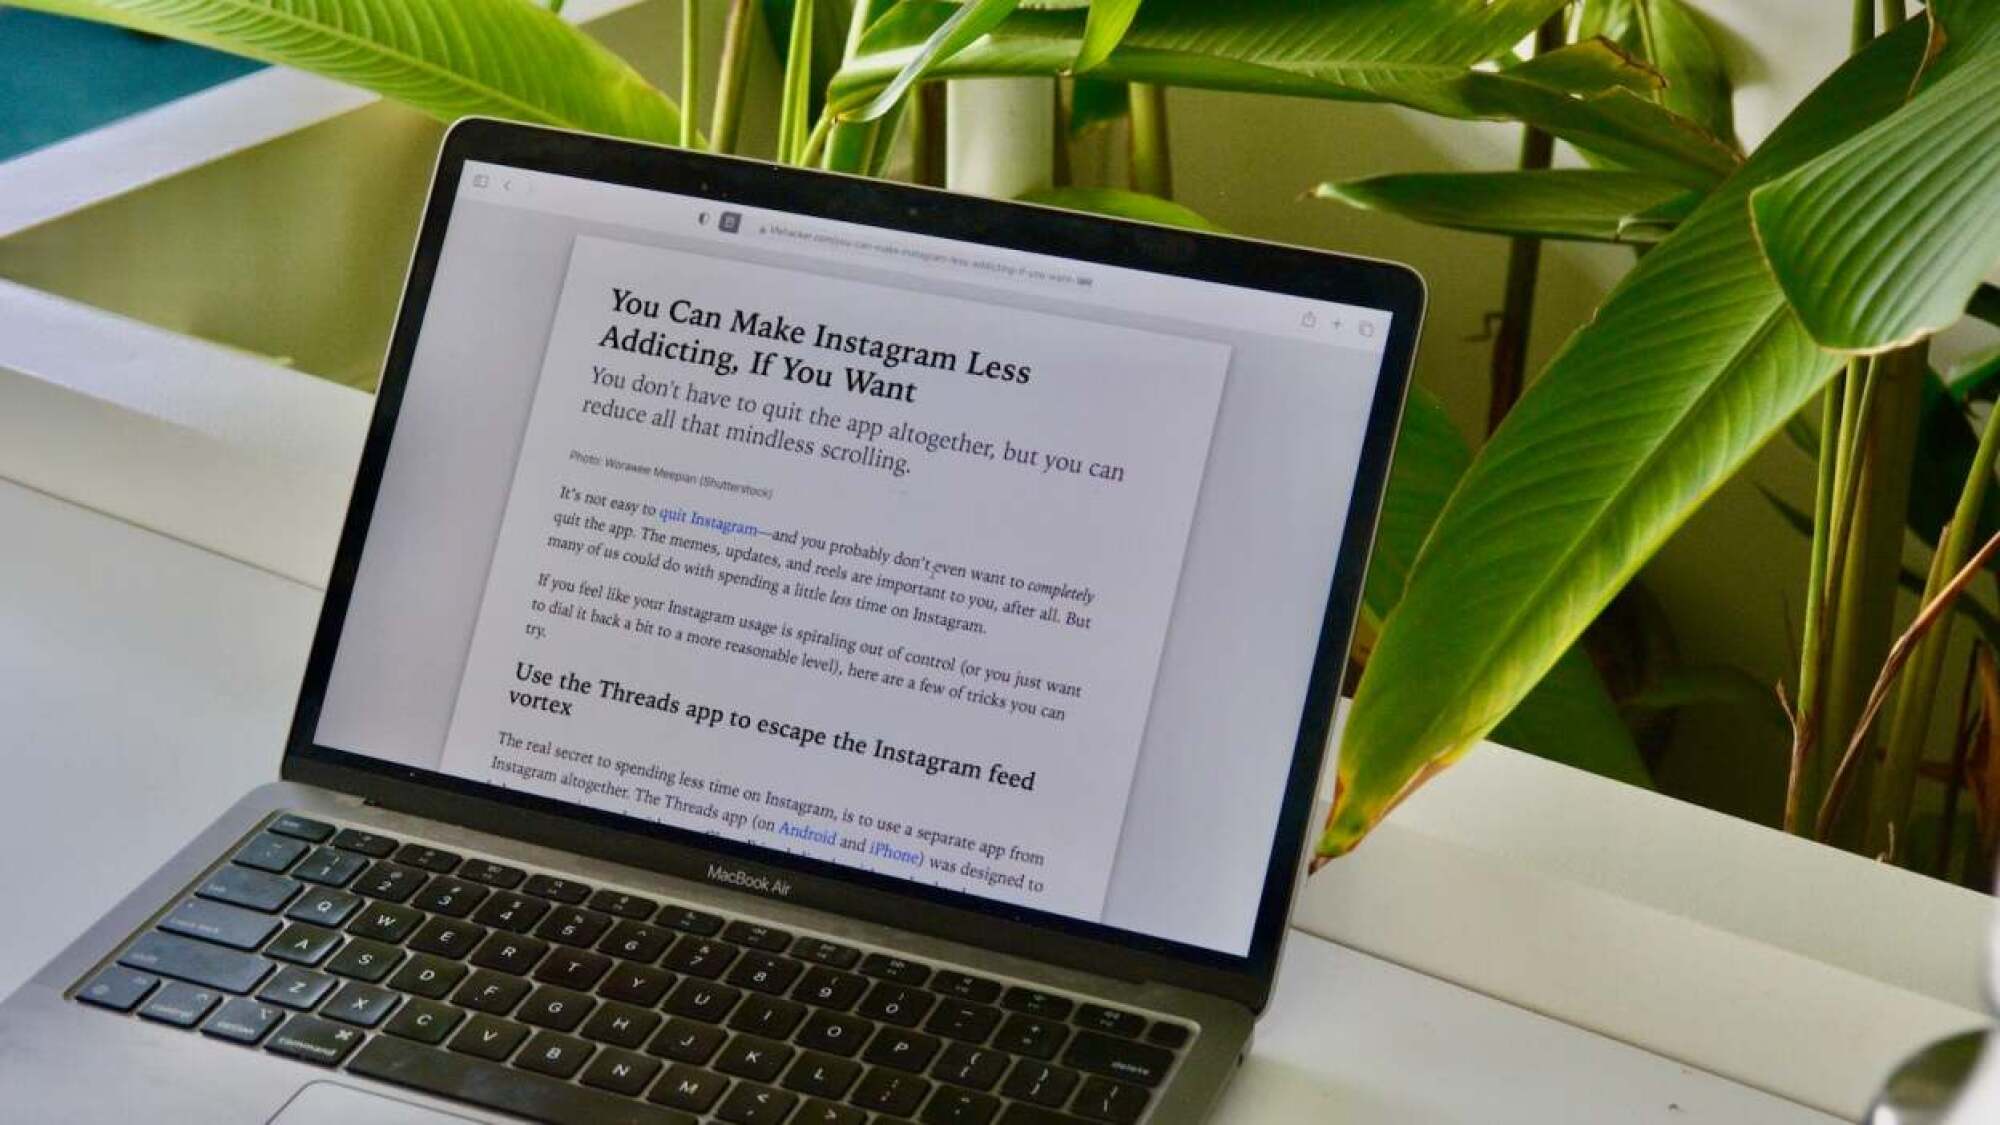 A MacBook on a desk surrounded by potted plants. The screen of the MacBook shows Reader mode open in Safari, on an article titled 